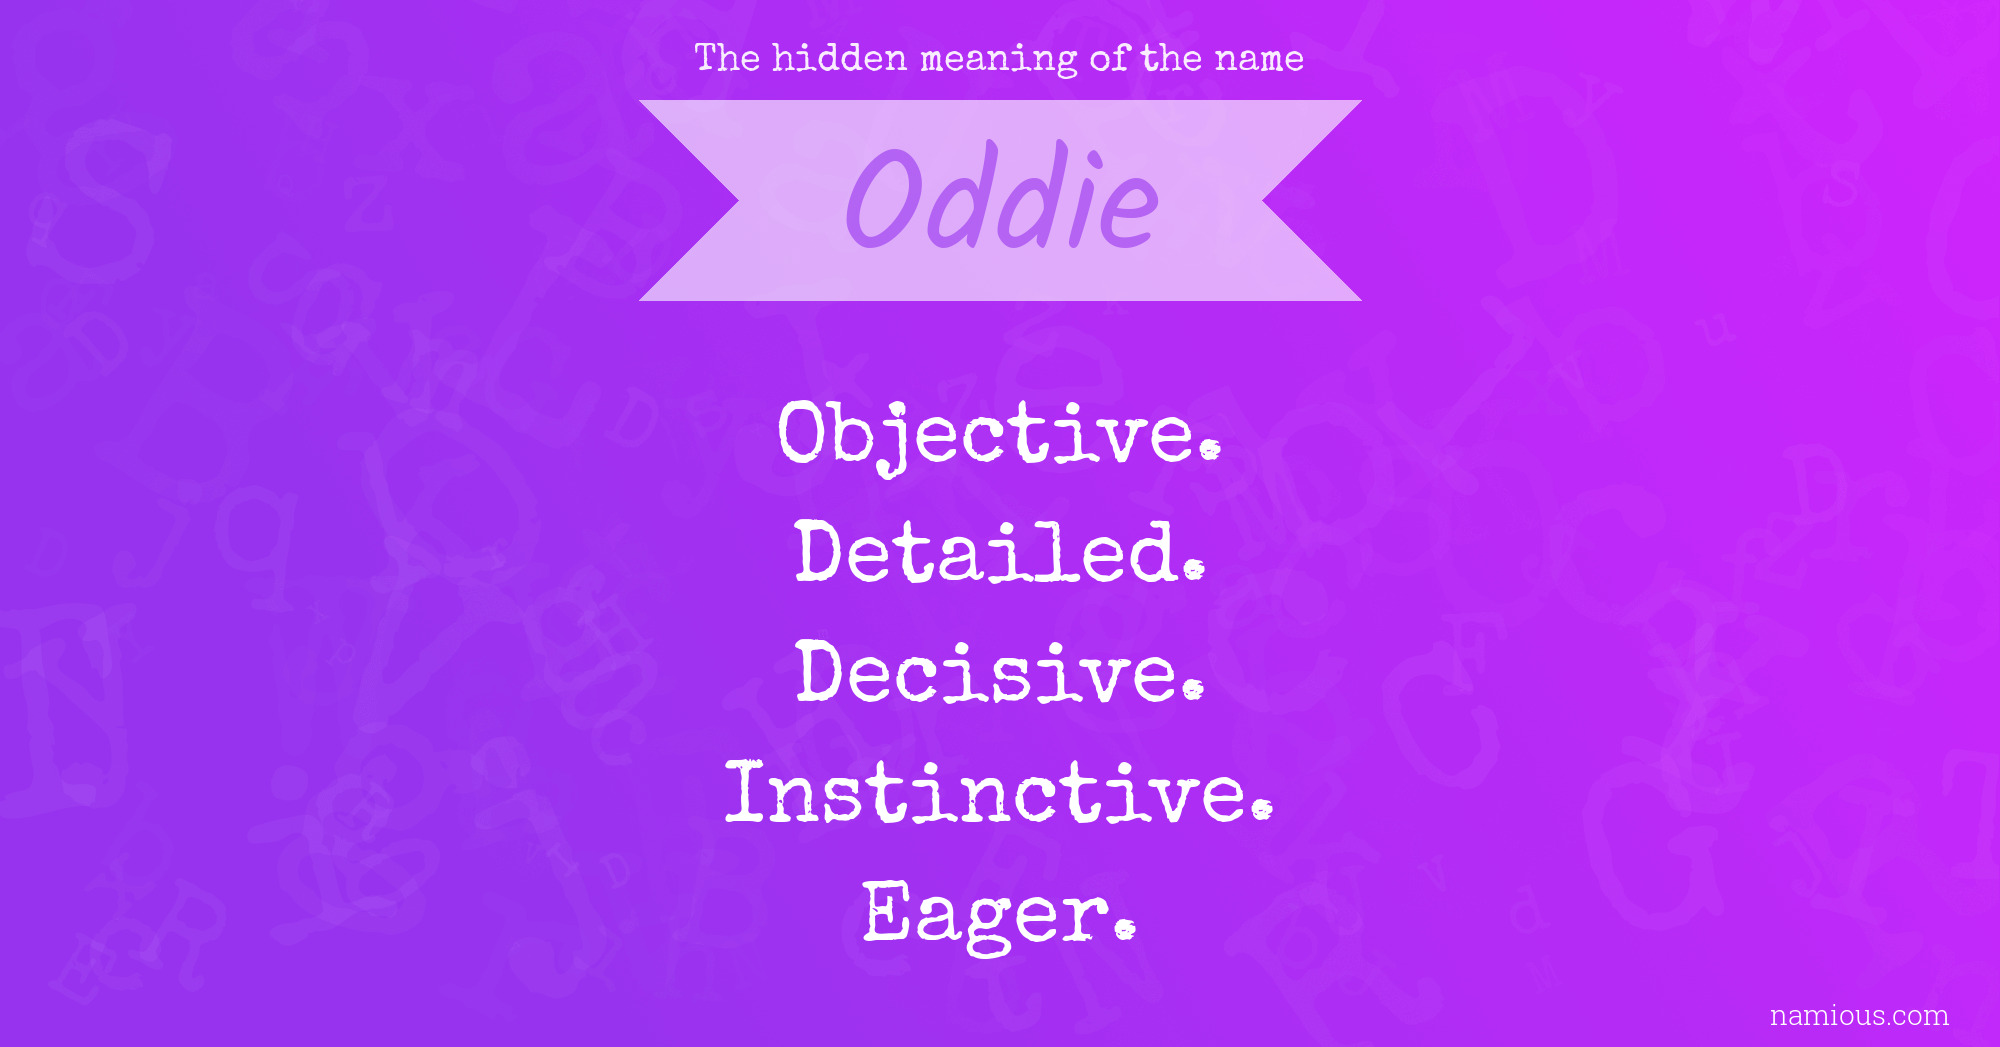 The hidden meaning of the name Oddie